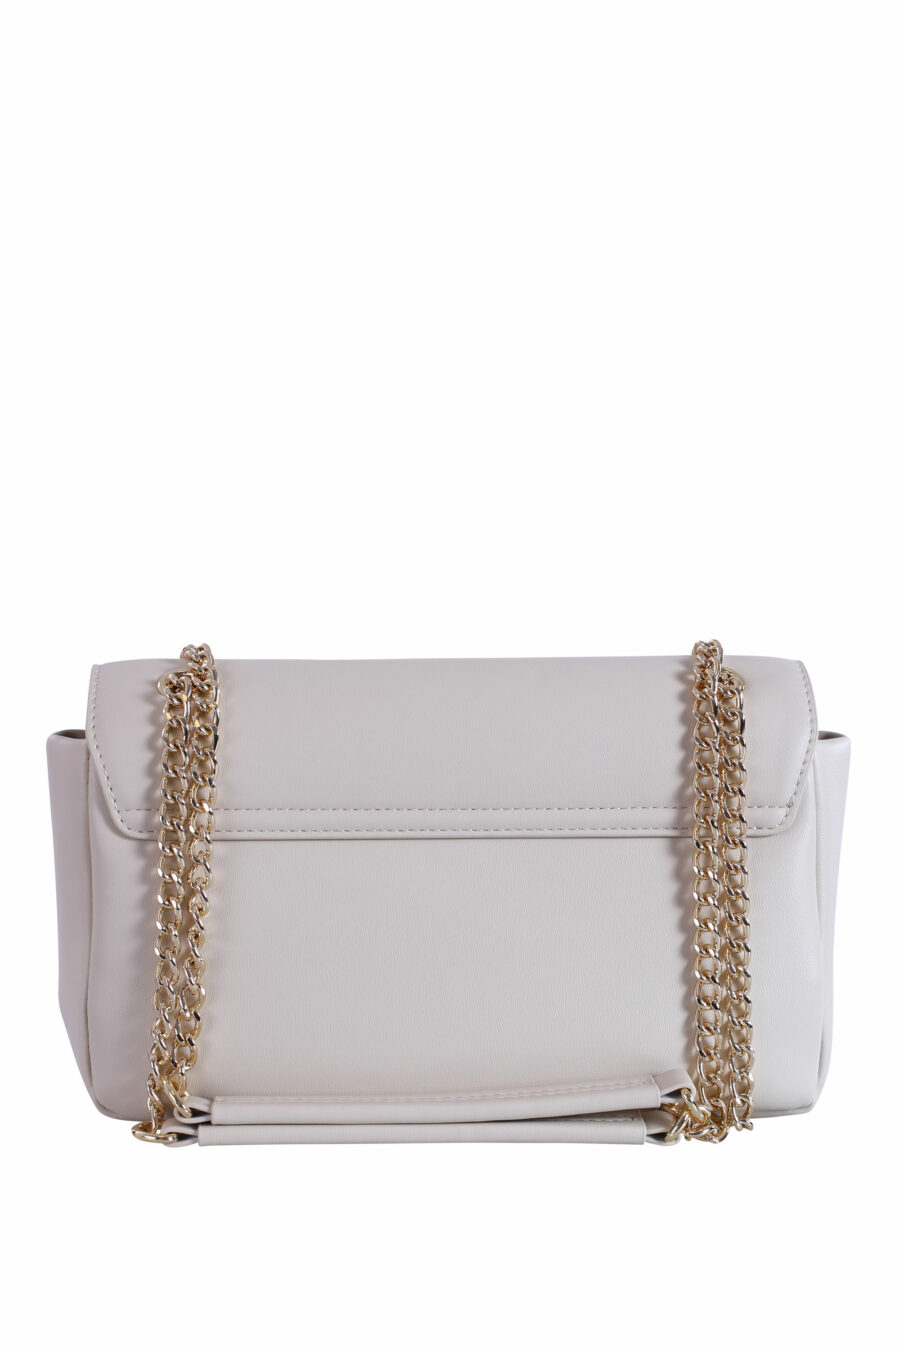 Beige shoulder bag with gold logo and chain - IMG 2888